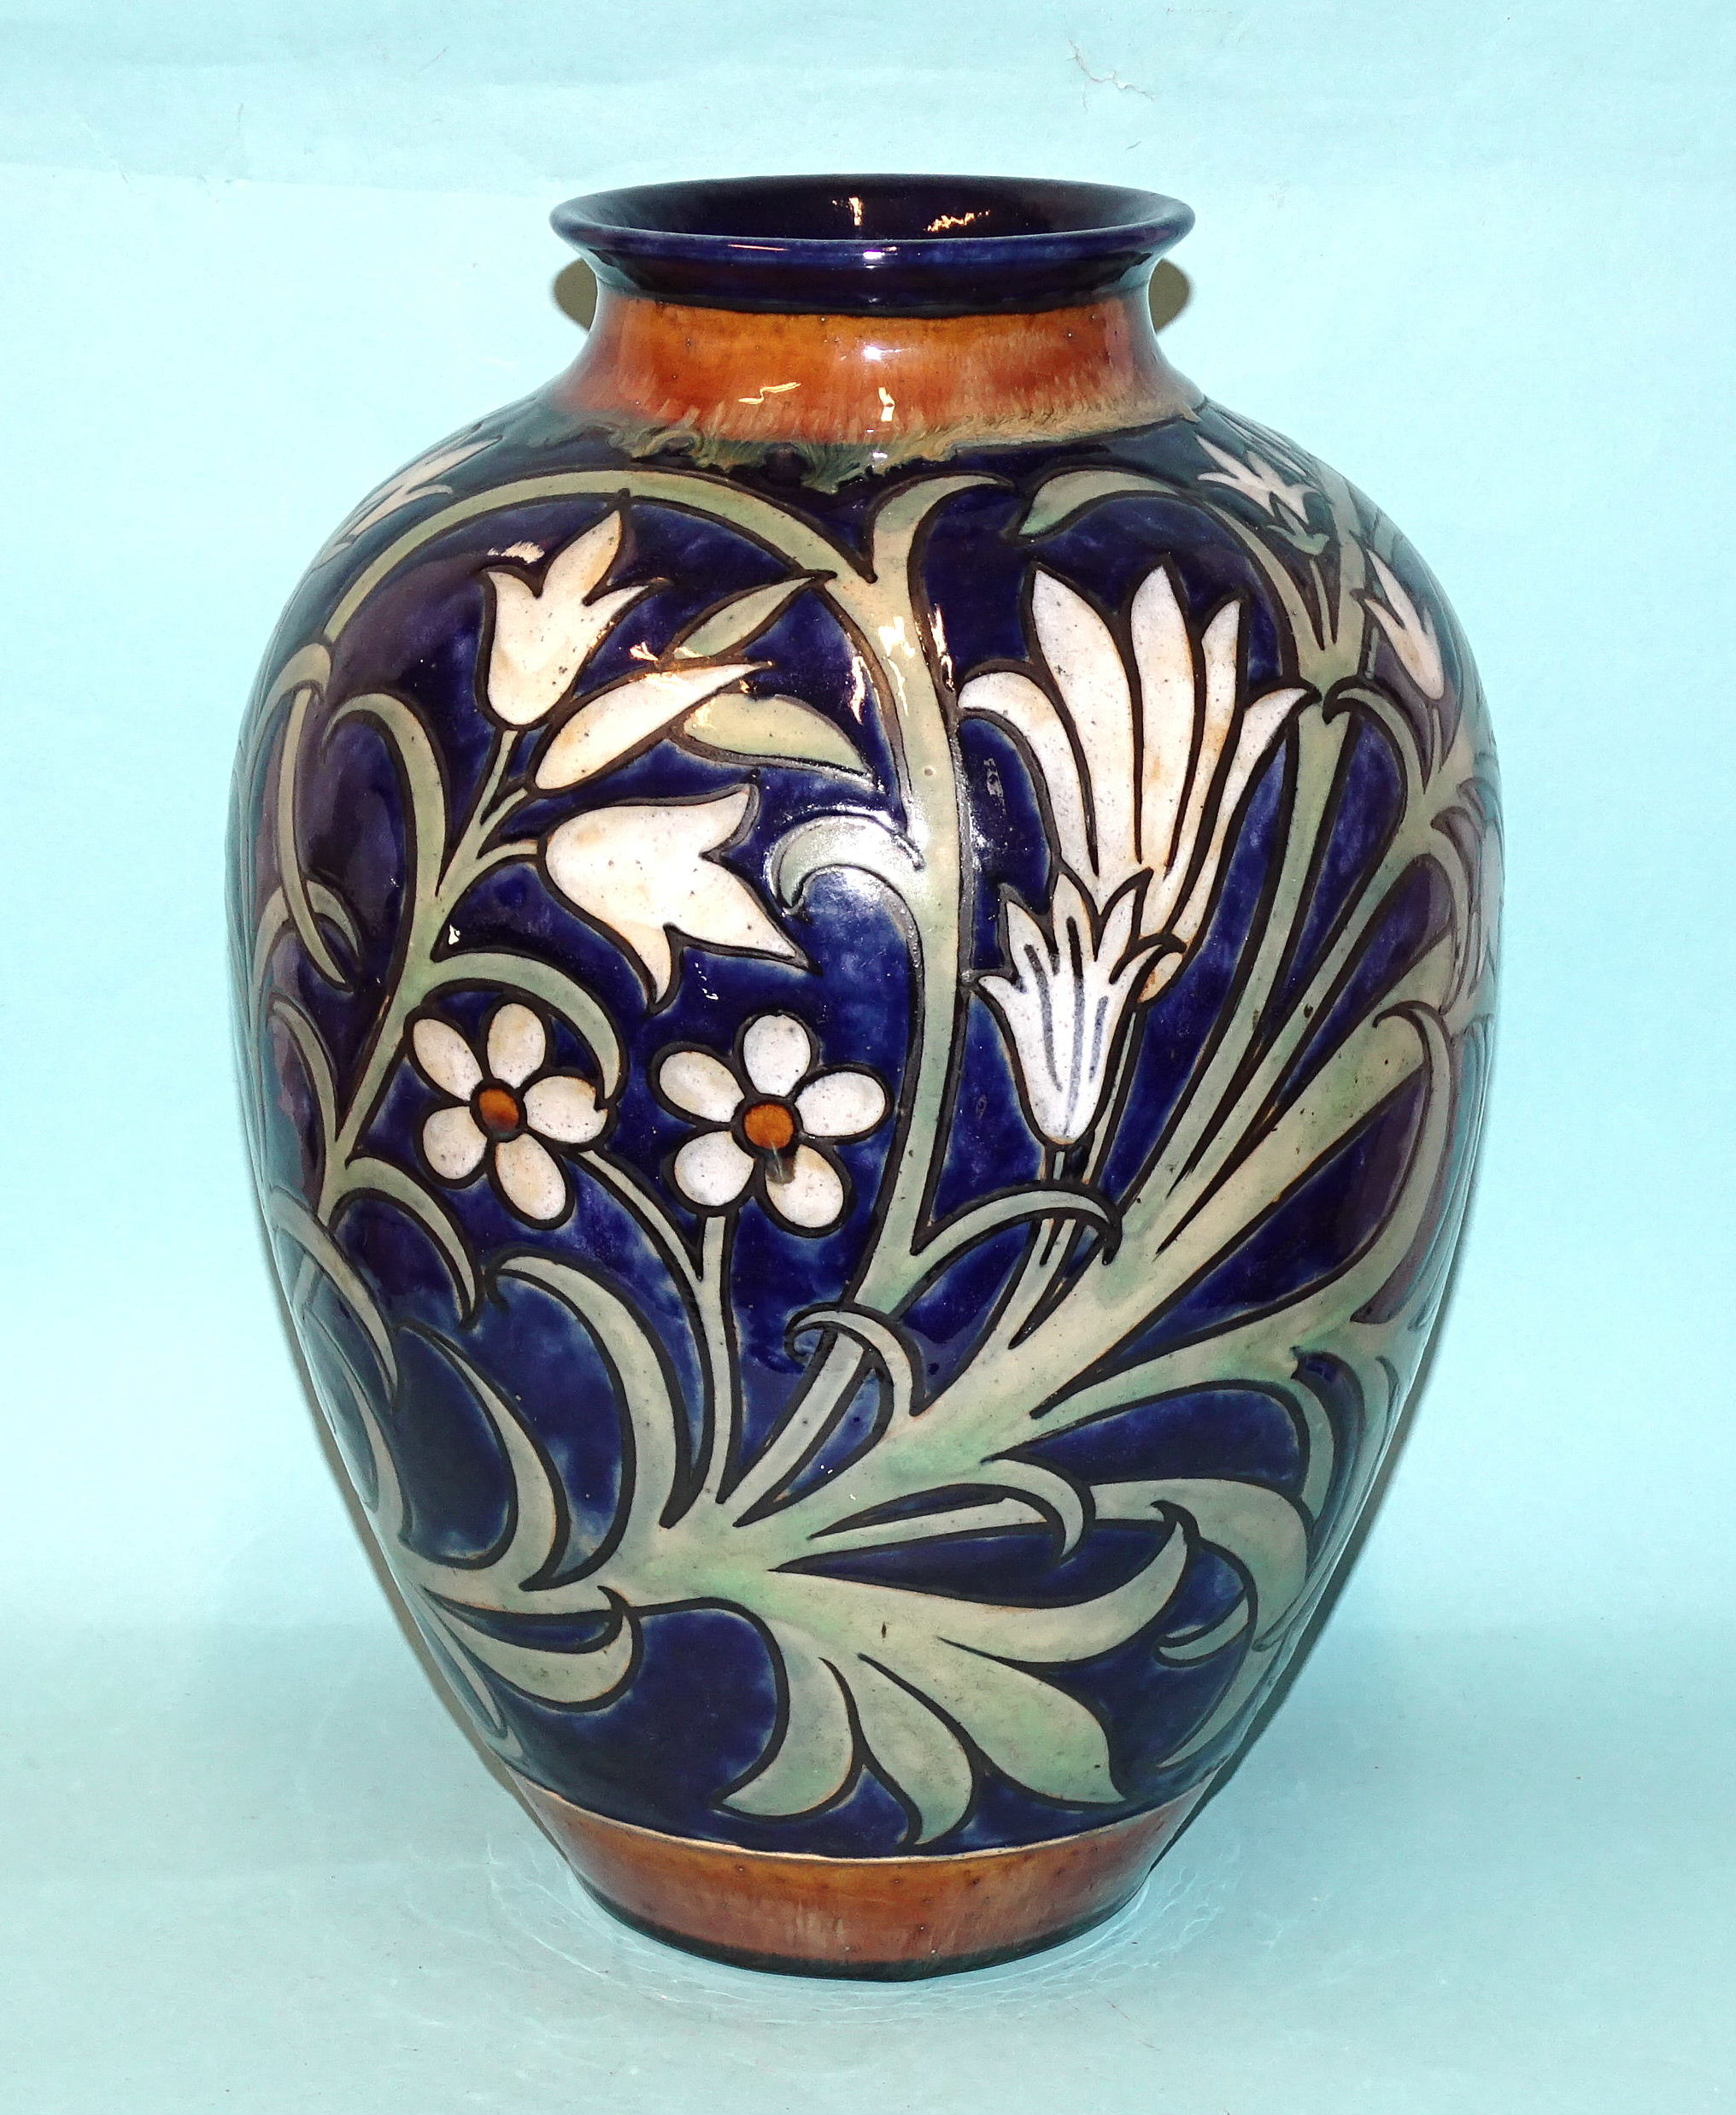 A Royal Doulton stoneware baluster-shaped vase by Harry Simeon, with stylised floral and leaf - Image 3 of 4